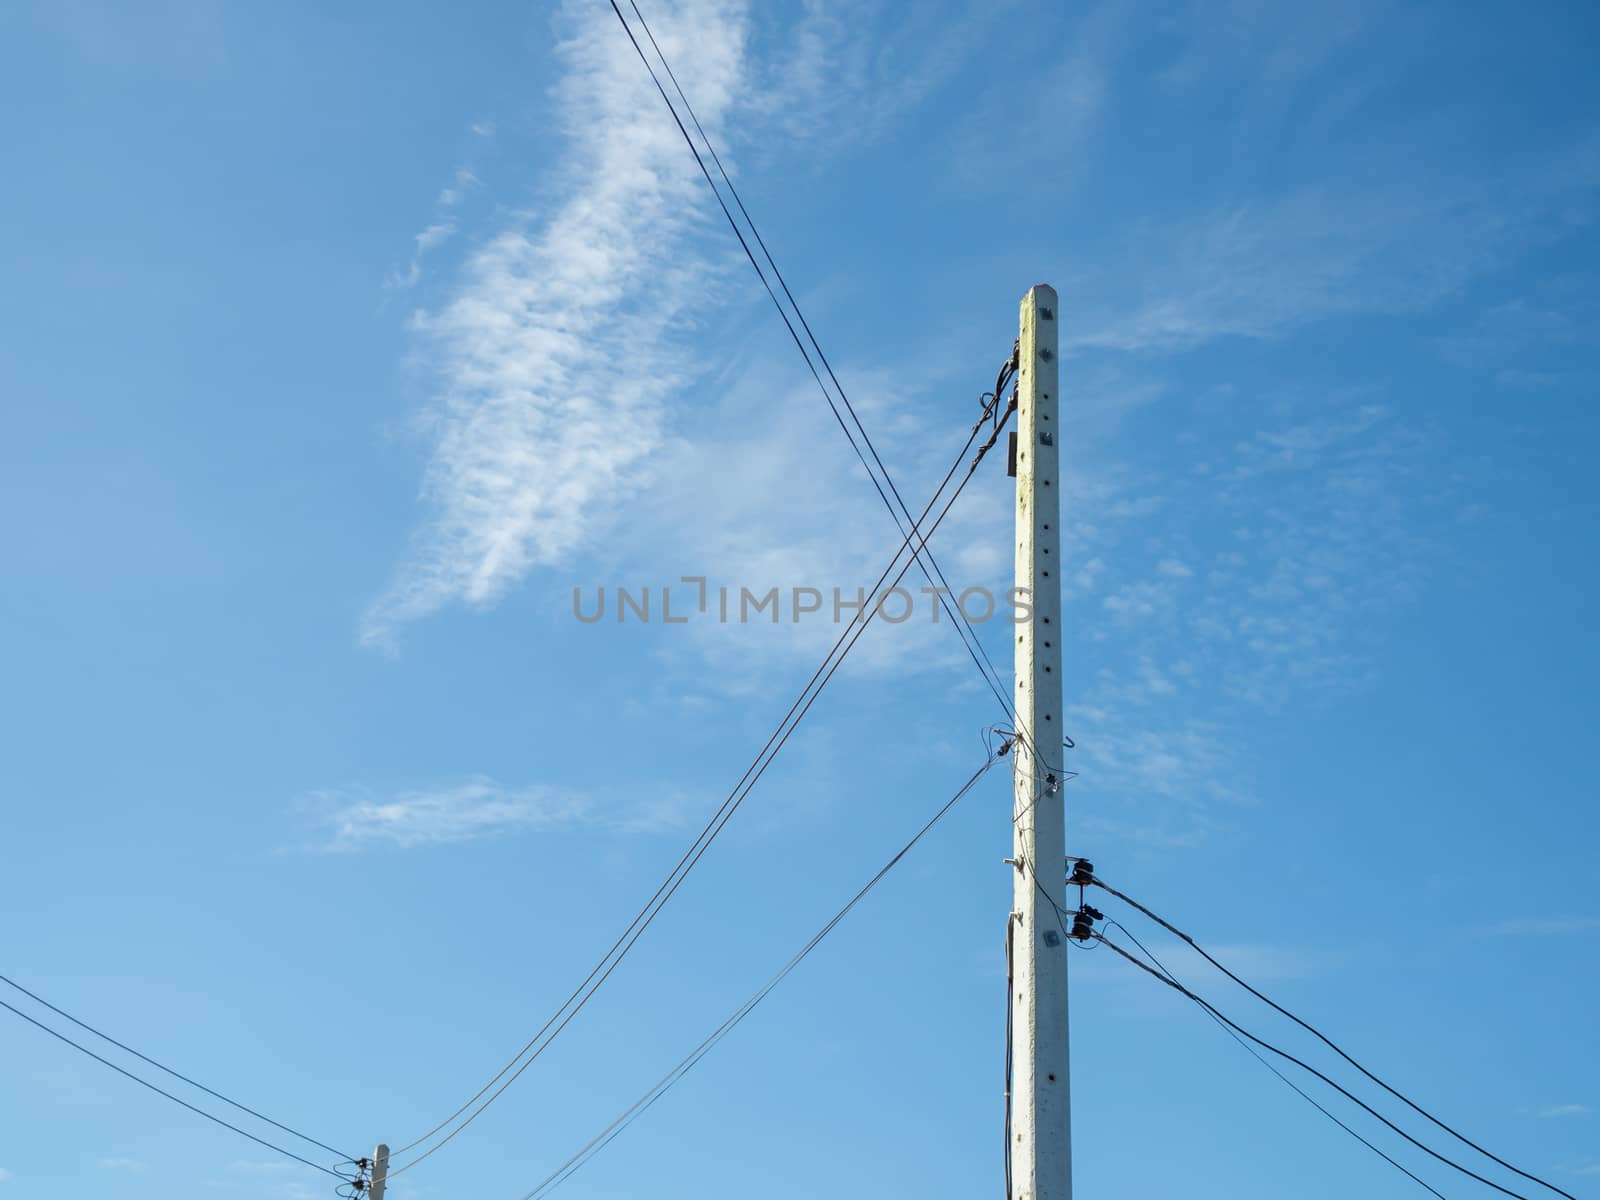 Electric poles and wires in a bright blue sky background. by Unimages2527